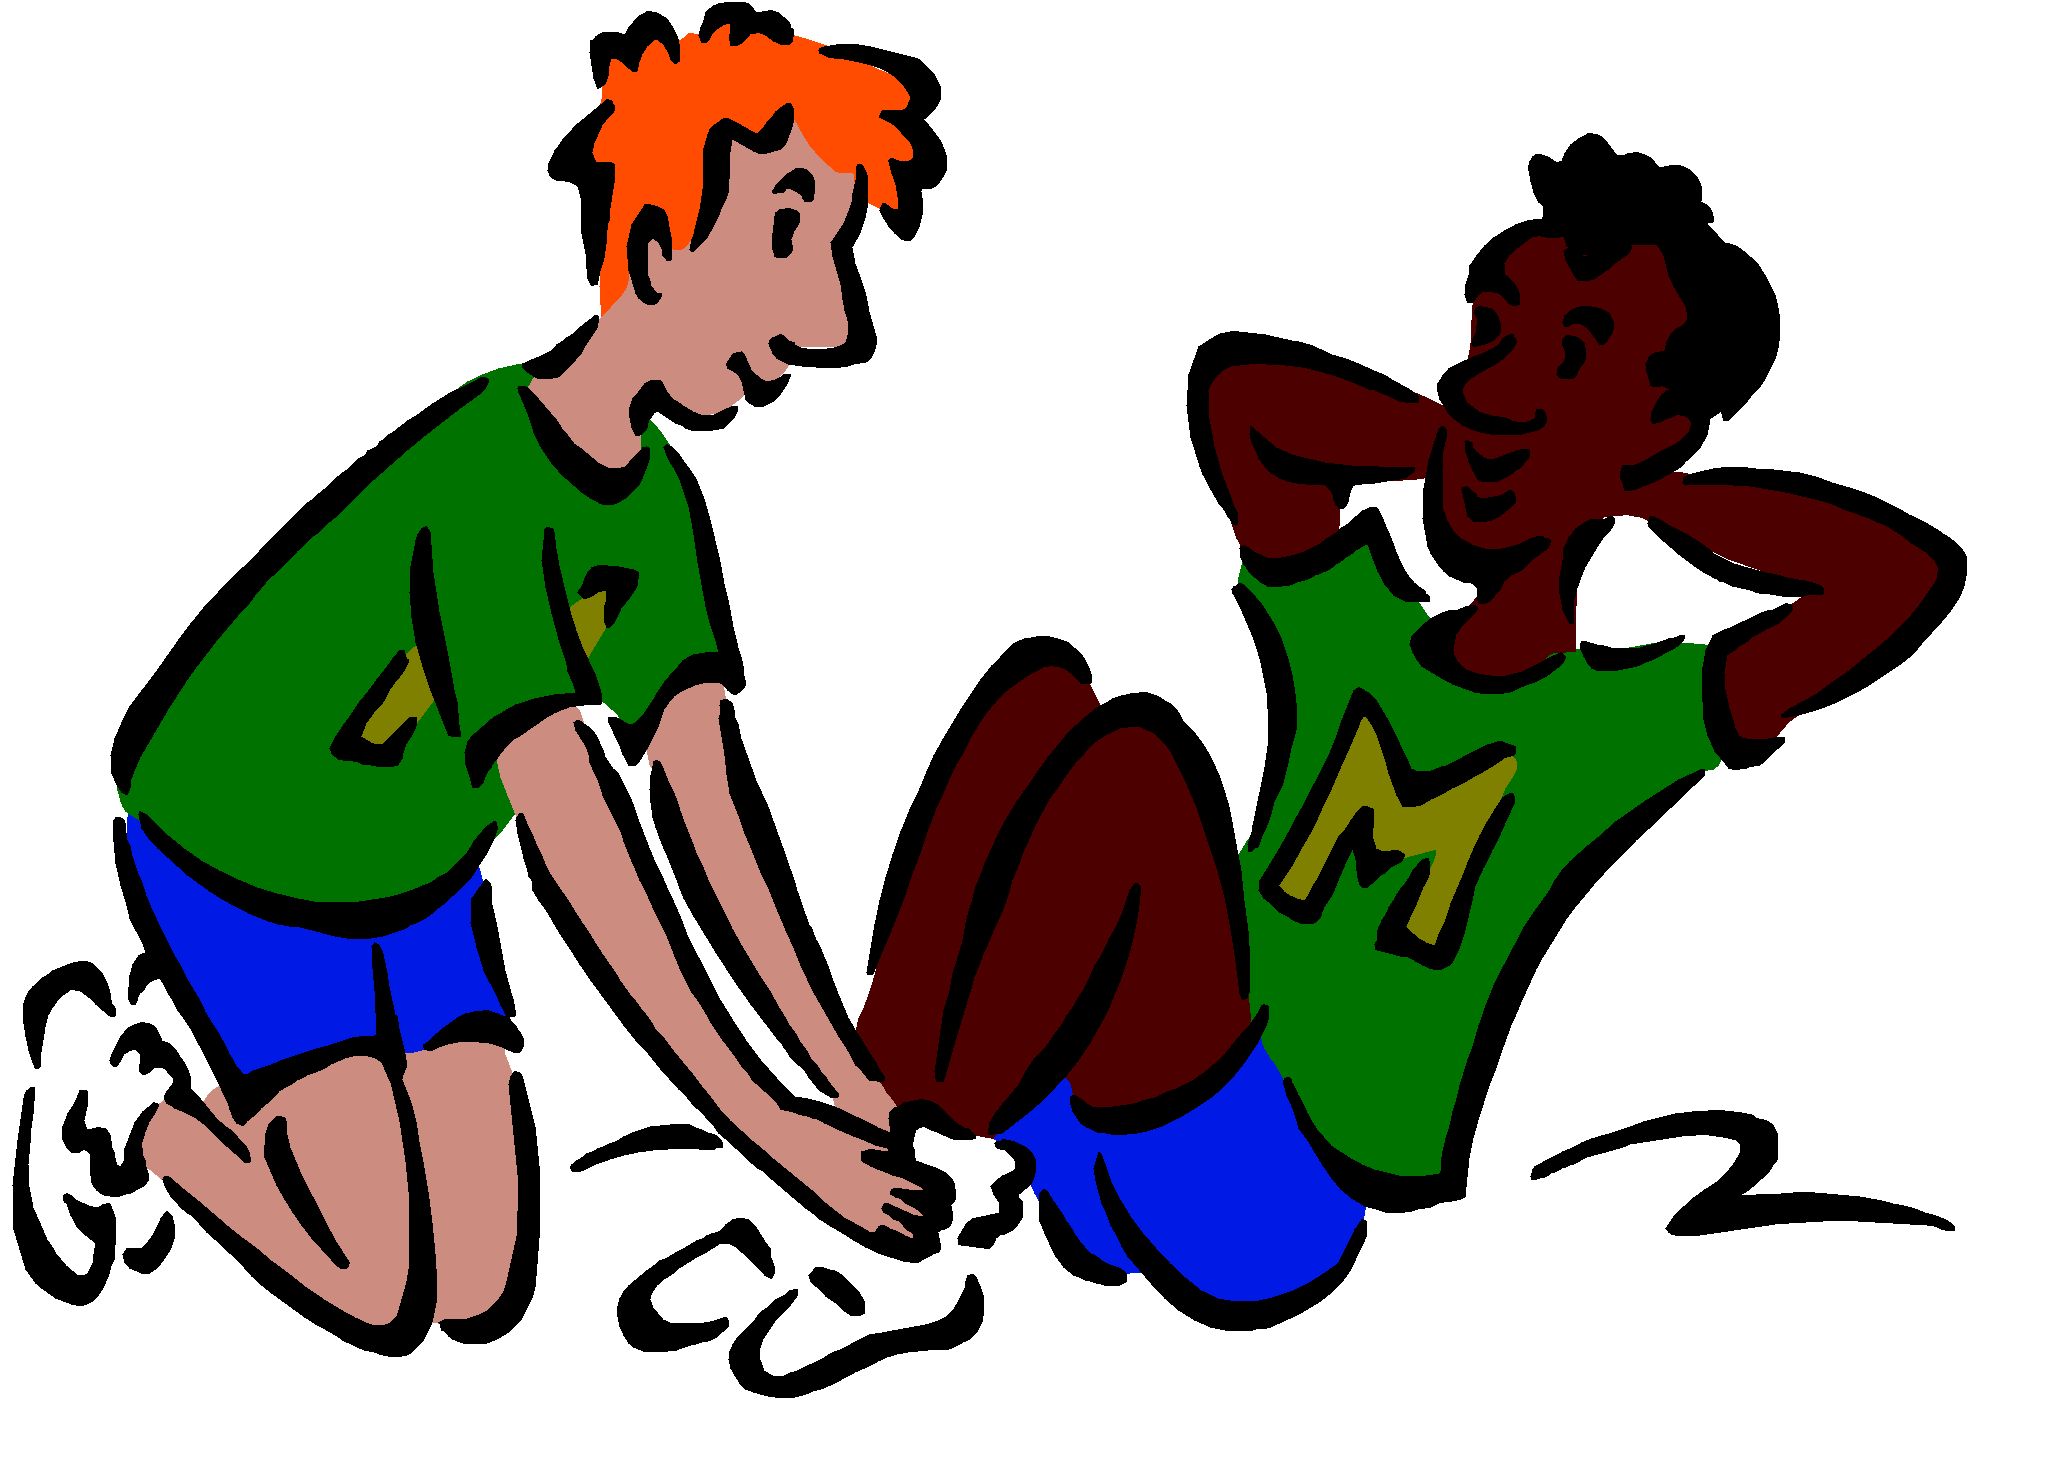 Movement clipart manipulative skill. Physical education image lt